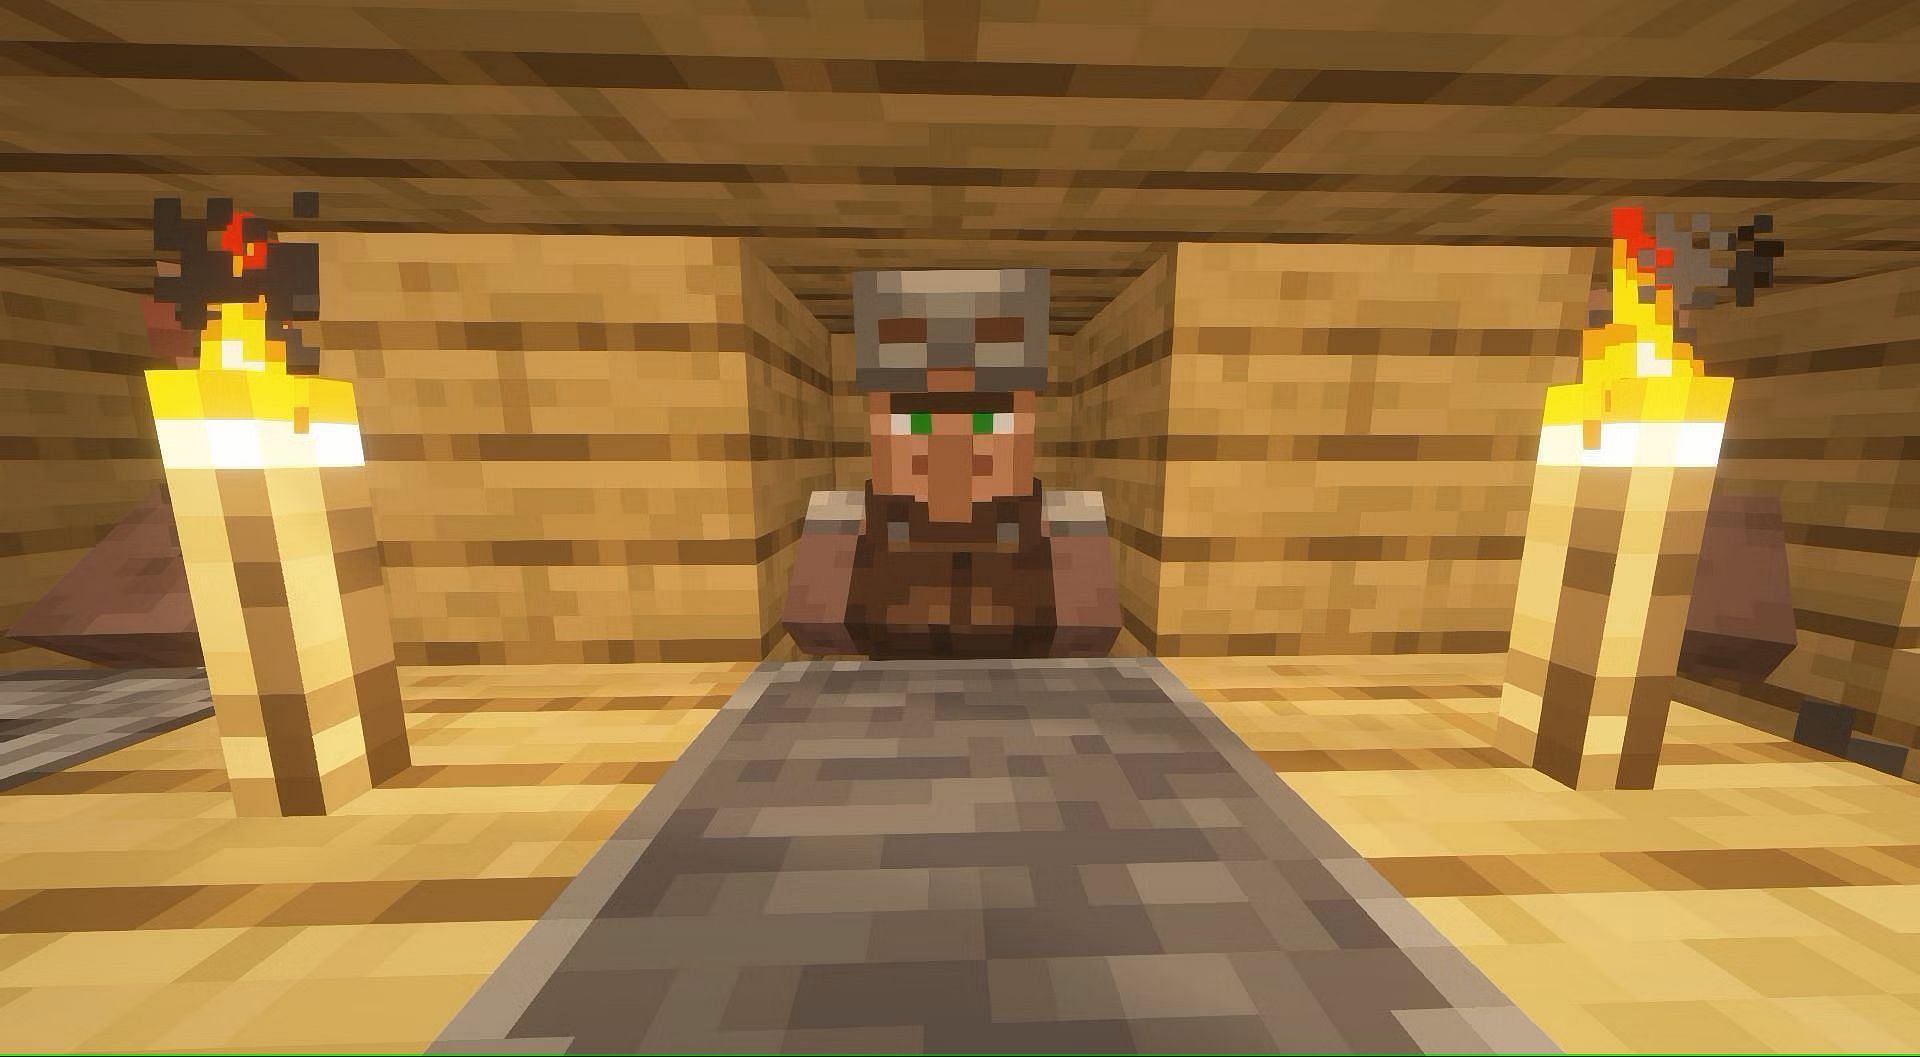 Armorers offer all kinds of armor parts for a few emeralds in Minecraft (Image via Mojang)